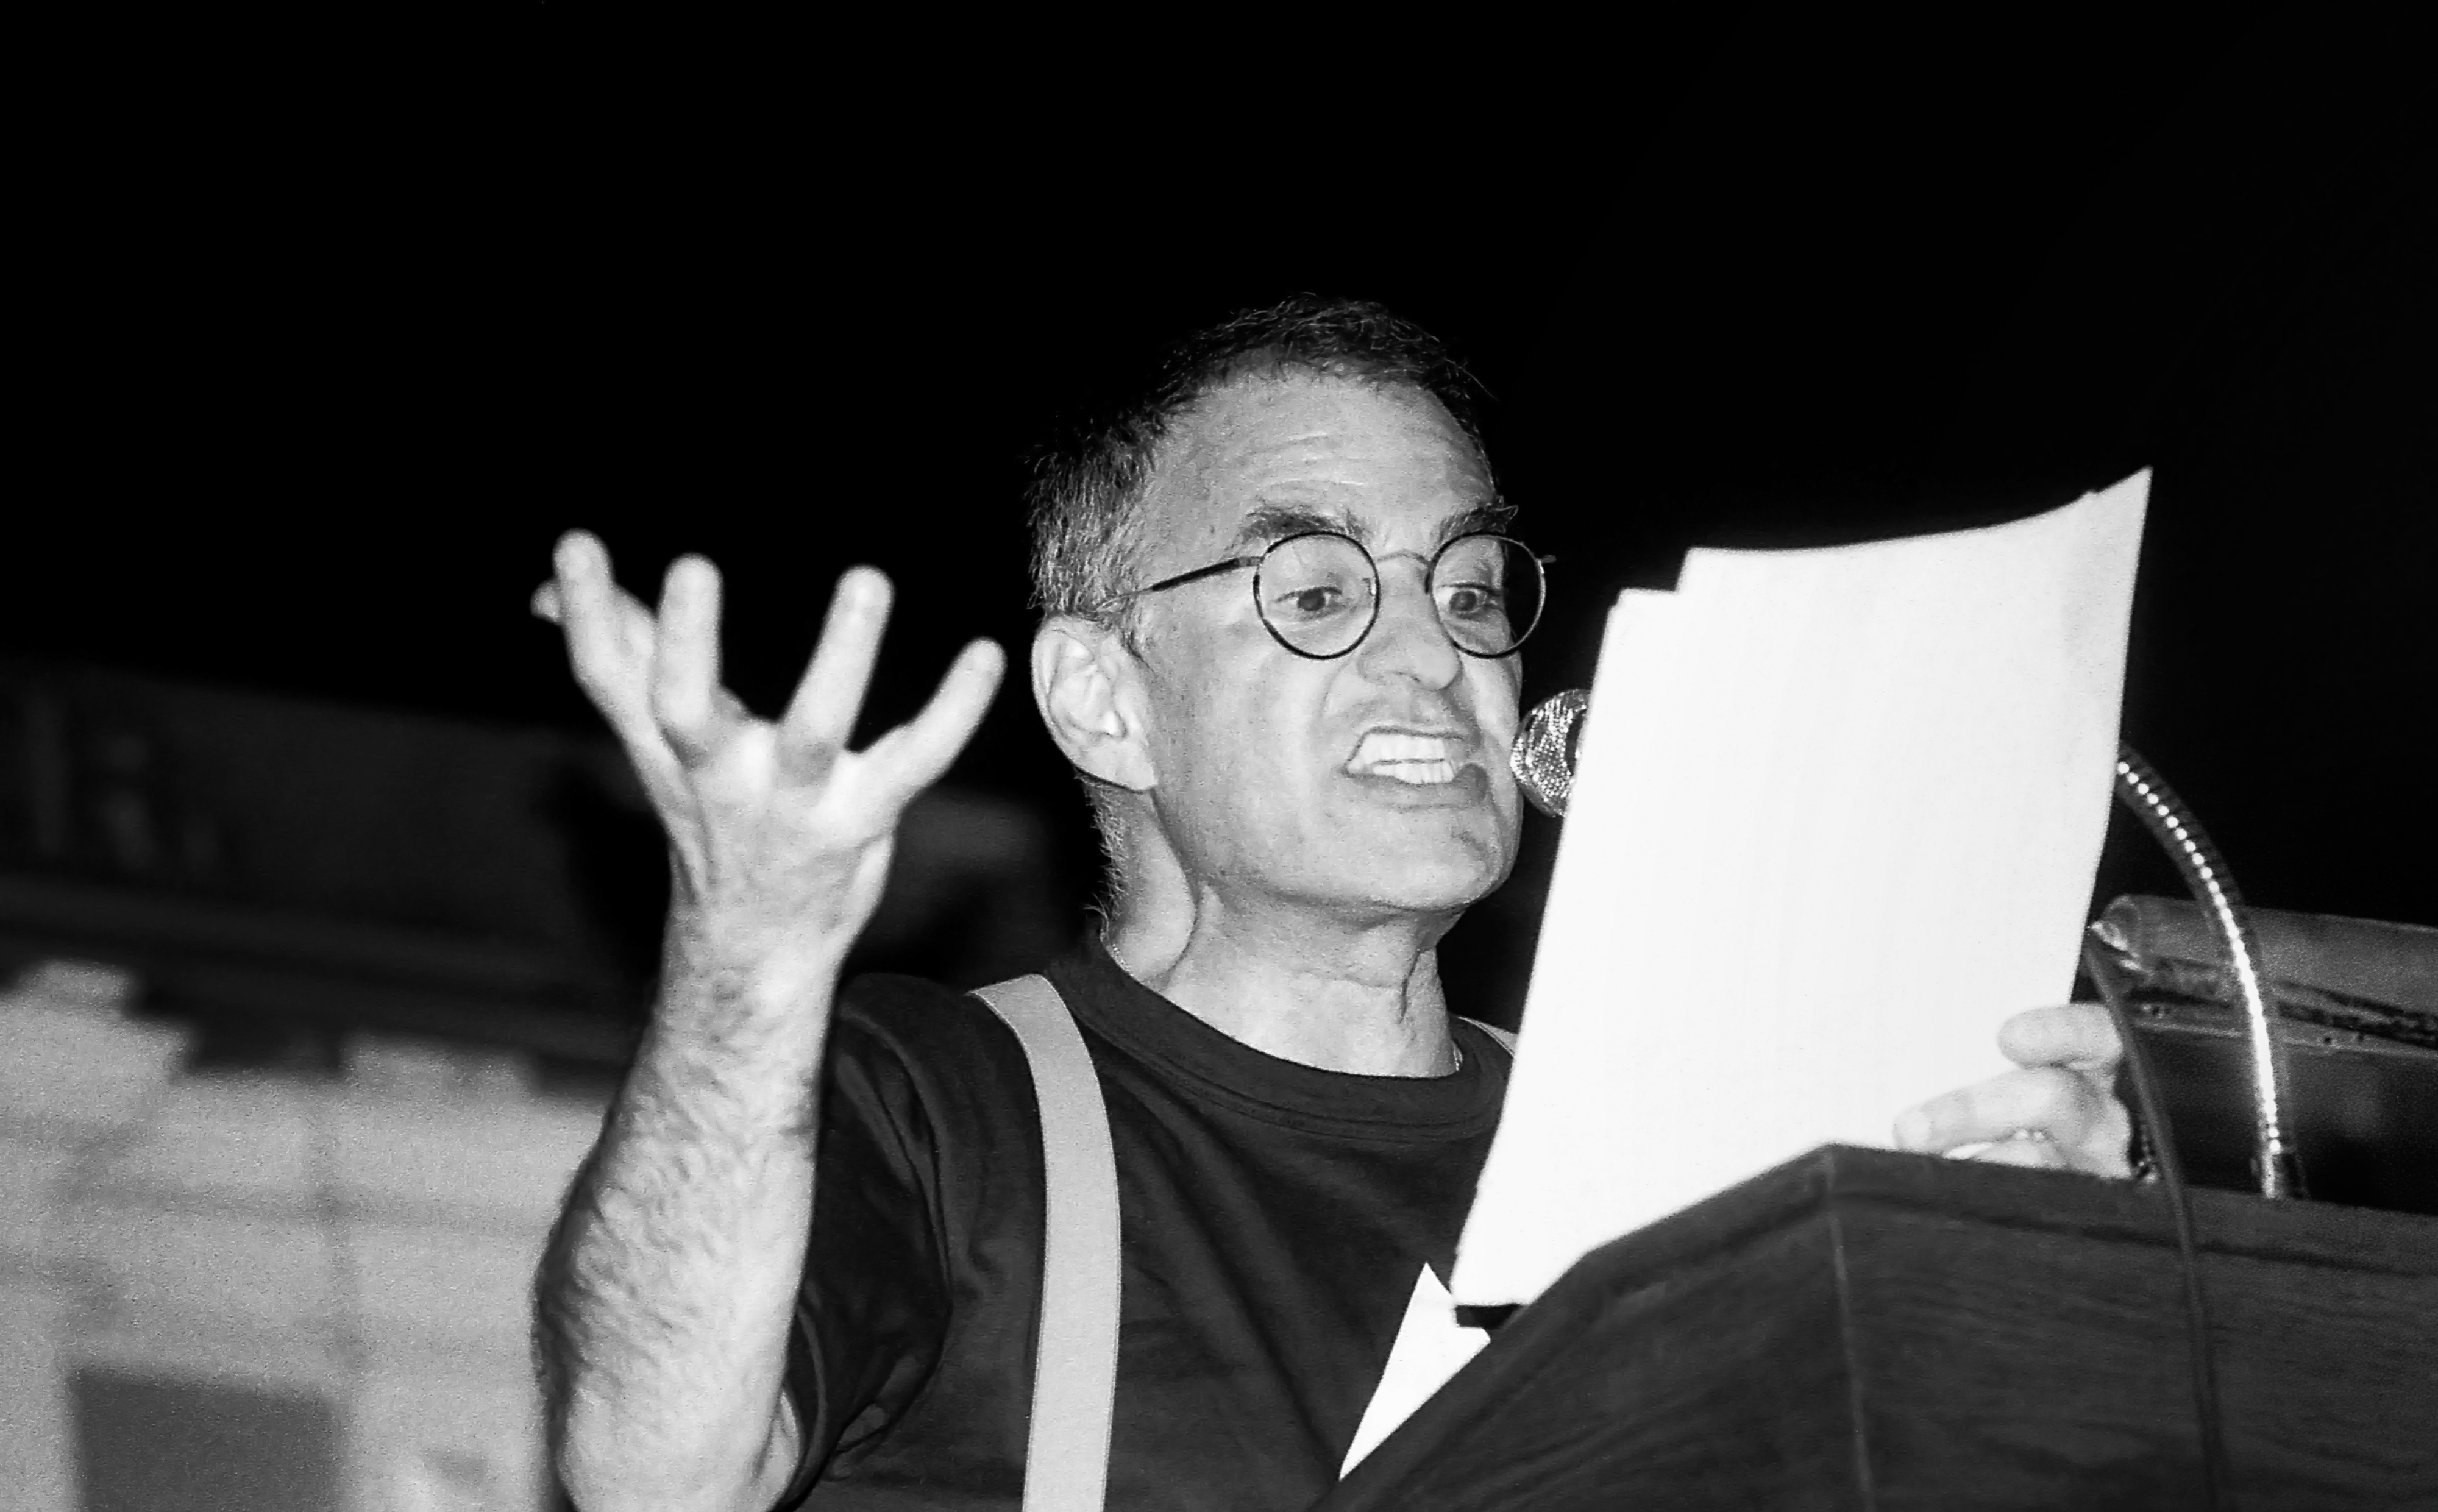 Larry Kramer speaking at a Boston Gay Town Meeting 6.9.87 at historic Faneuil Hall in Boston MA sponsored by the Boston Lesbian and Gay Political Alliance.